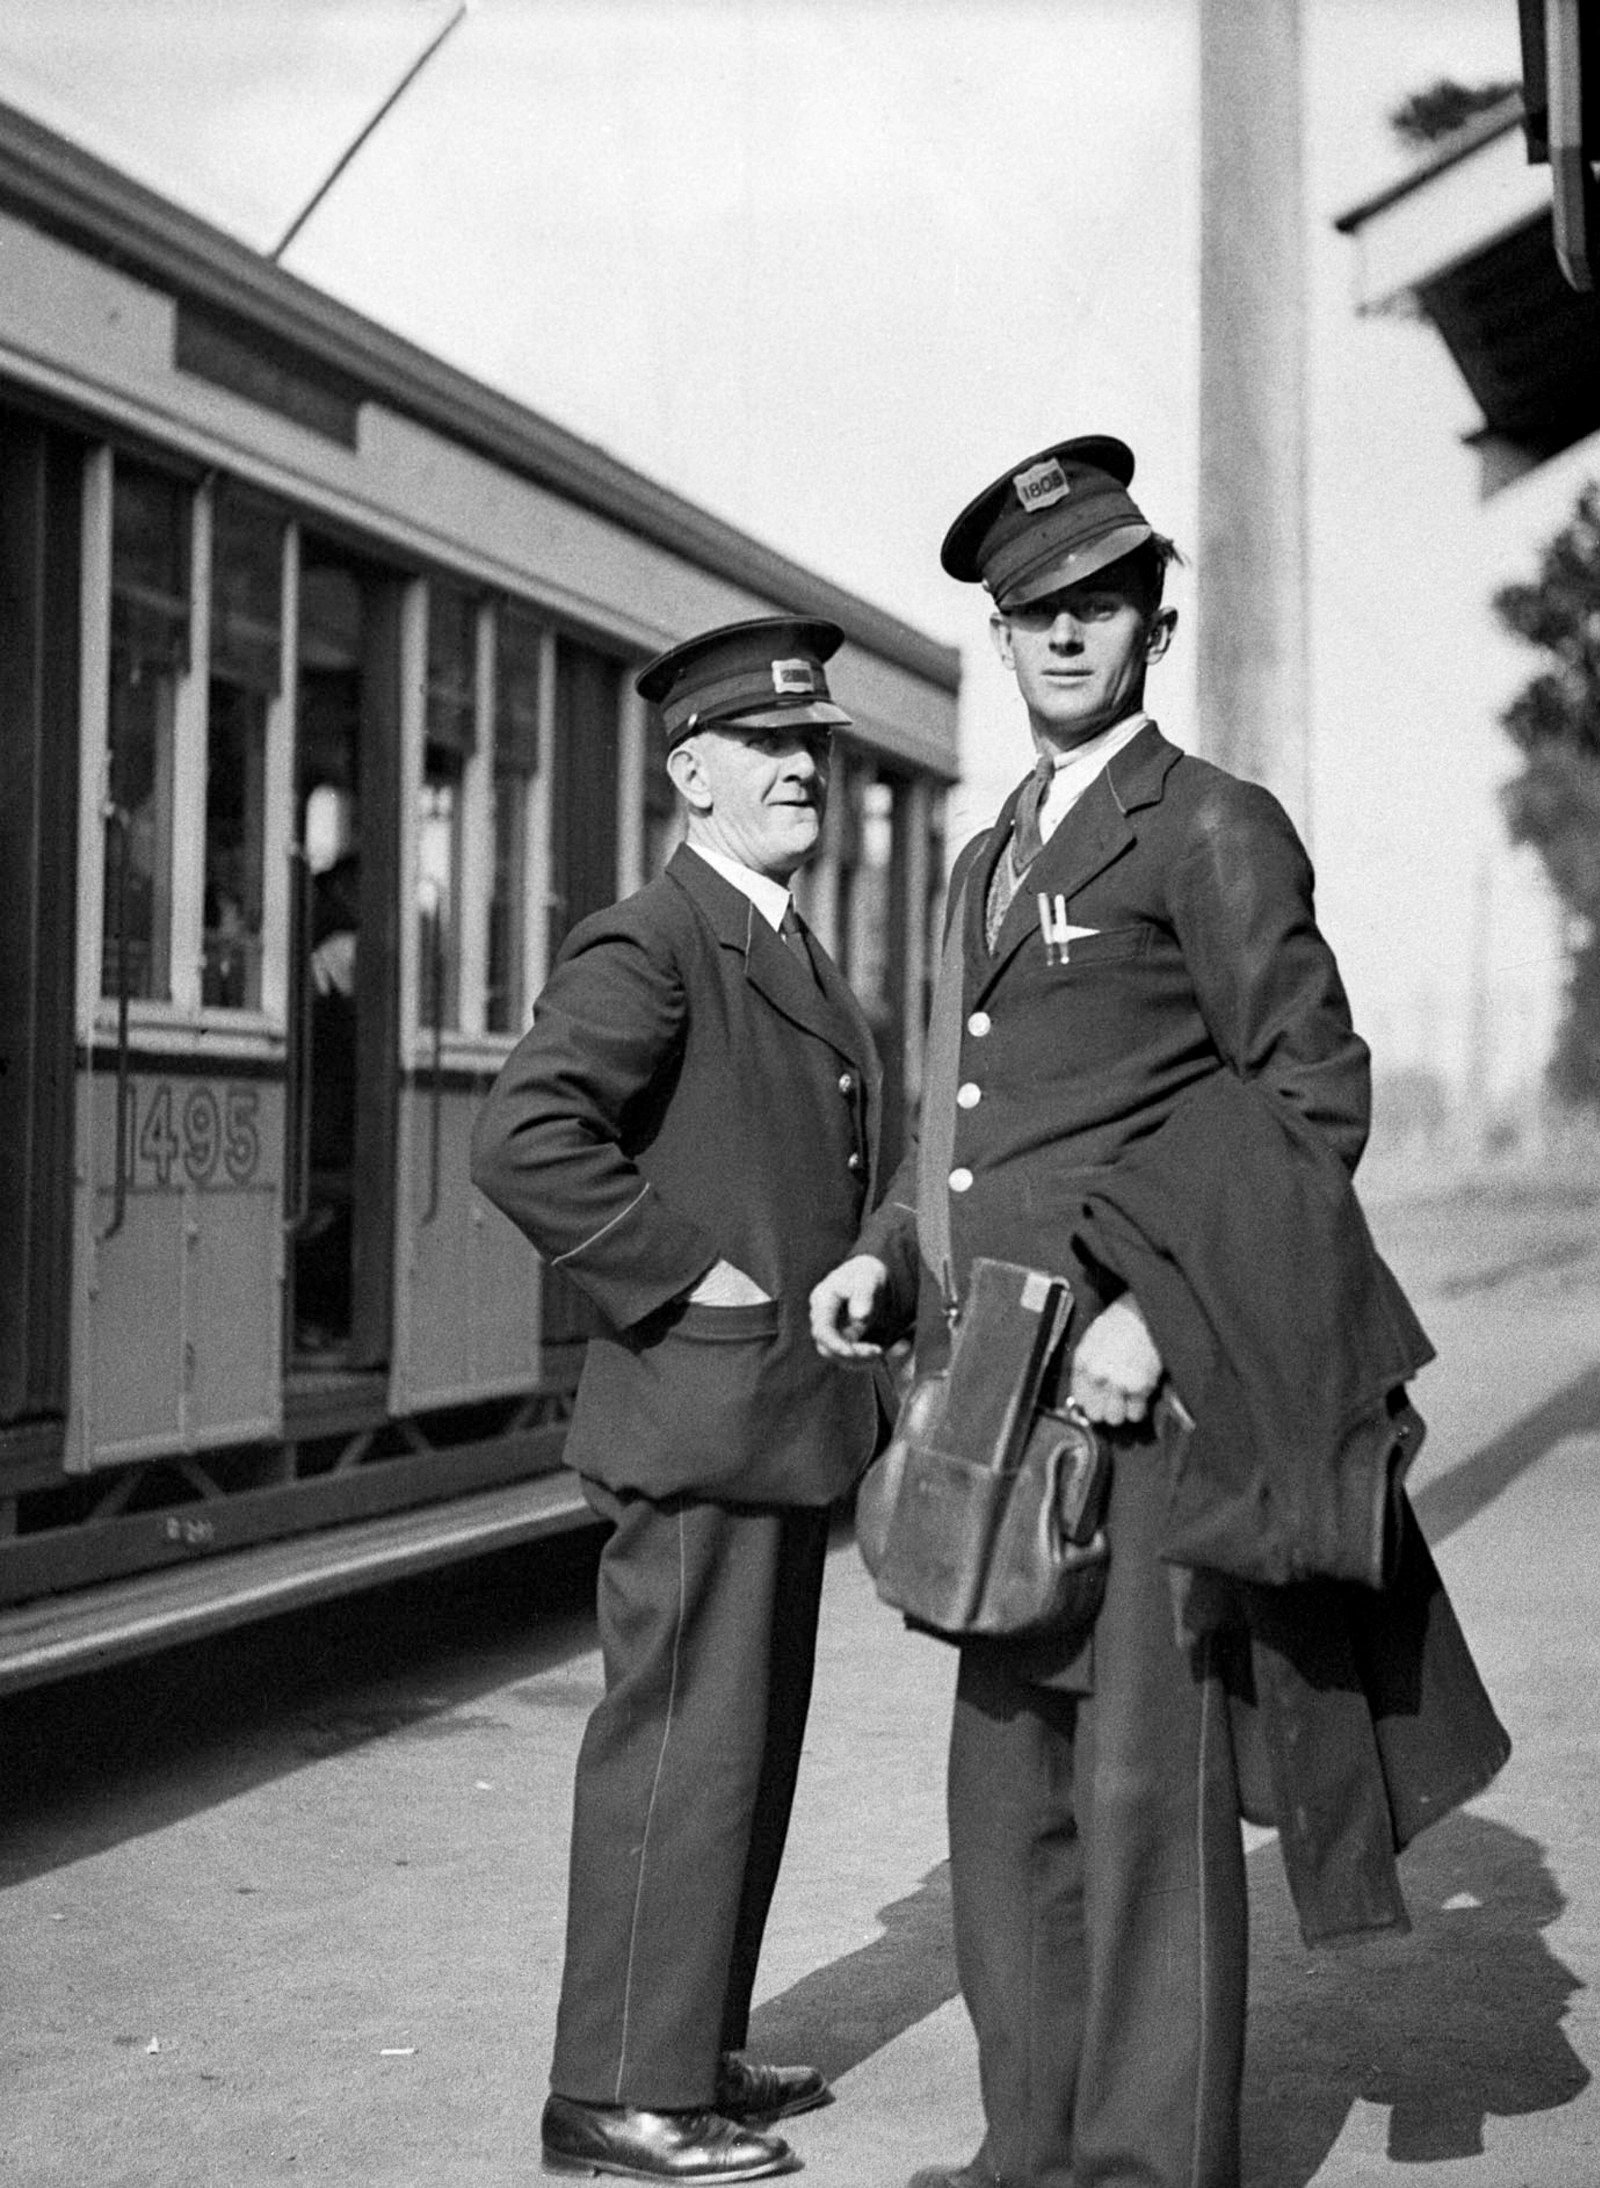 Two uniformed tram way men stand on the street beside a tram. One carries leather bag on his shoulder.